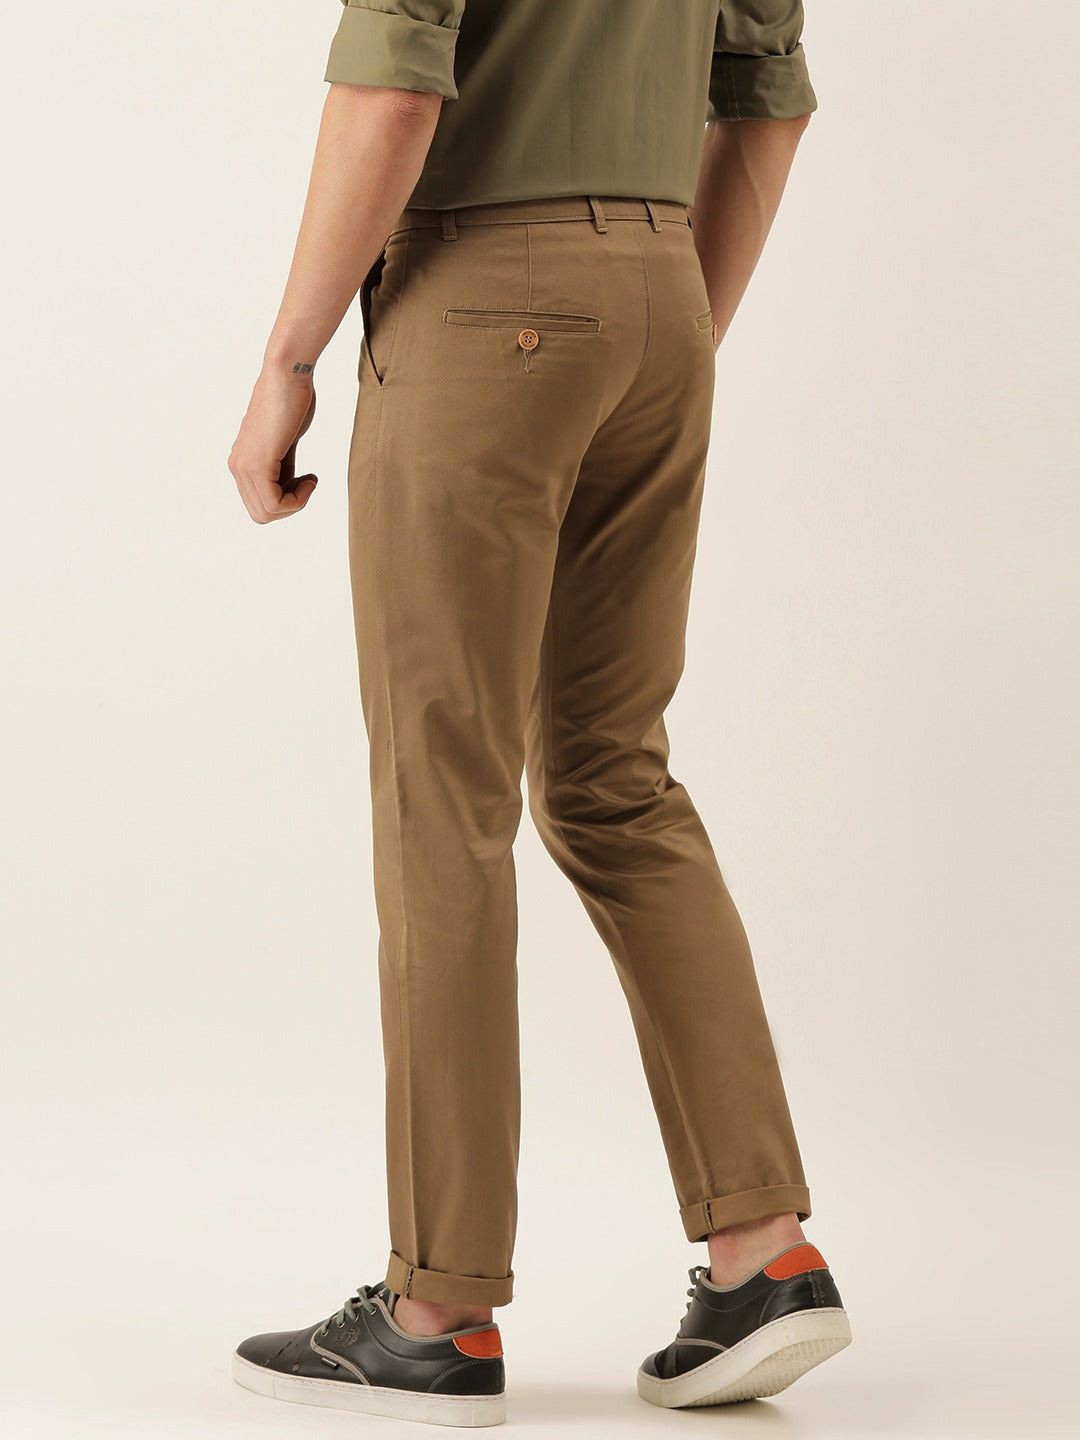 The Best Relaxed Trousers for Men 2021 | Reviewed by Typical Contents